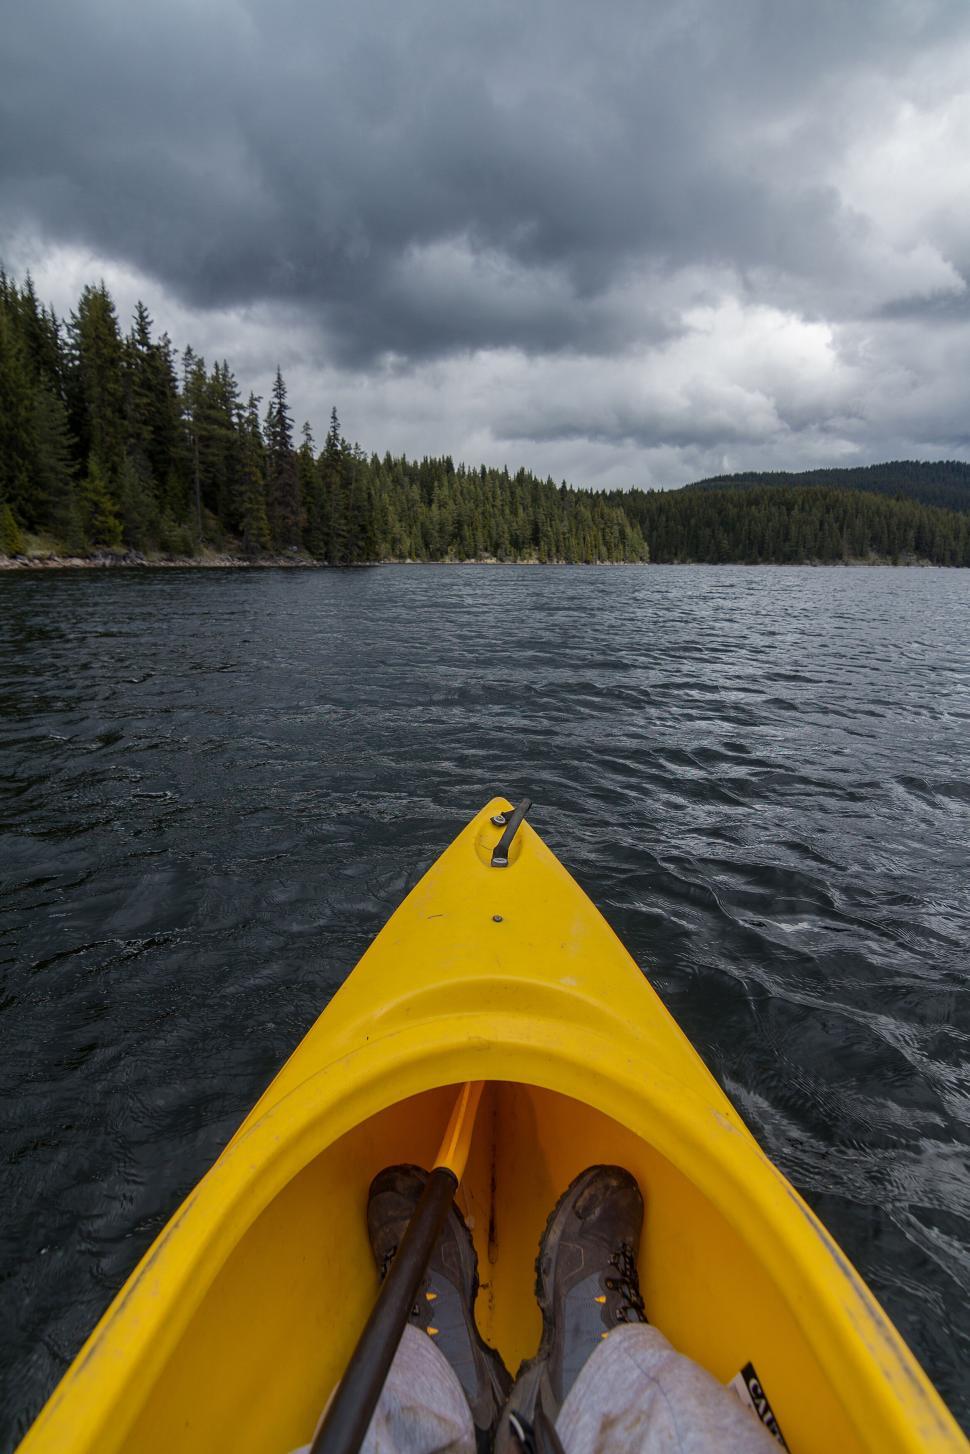 Free Image of A yellow kayak on a lake with trees in the background 